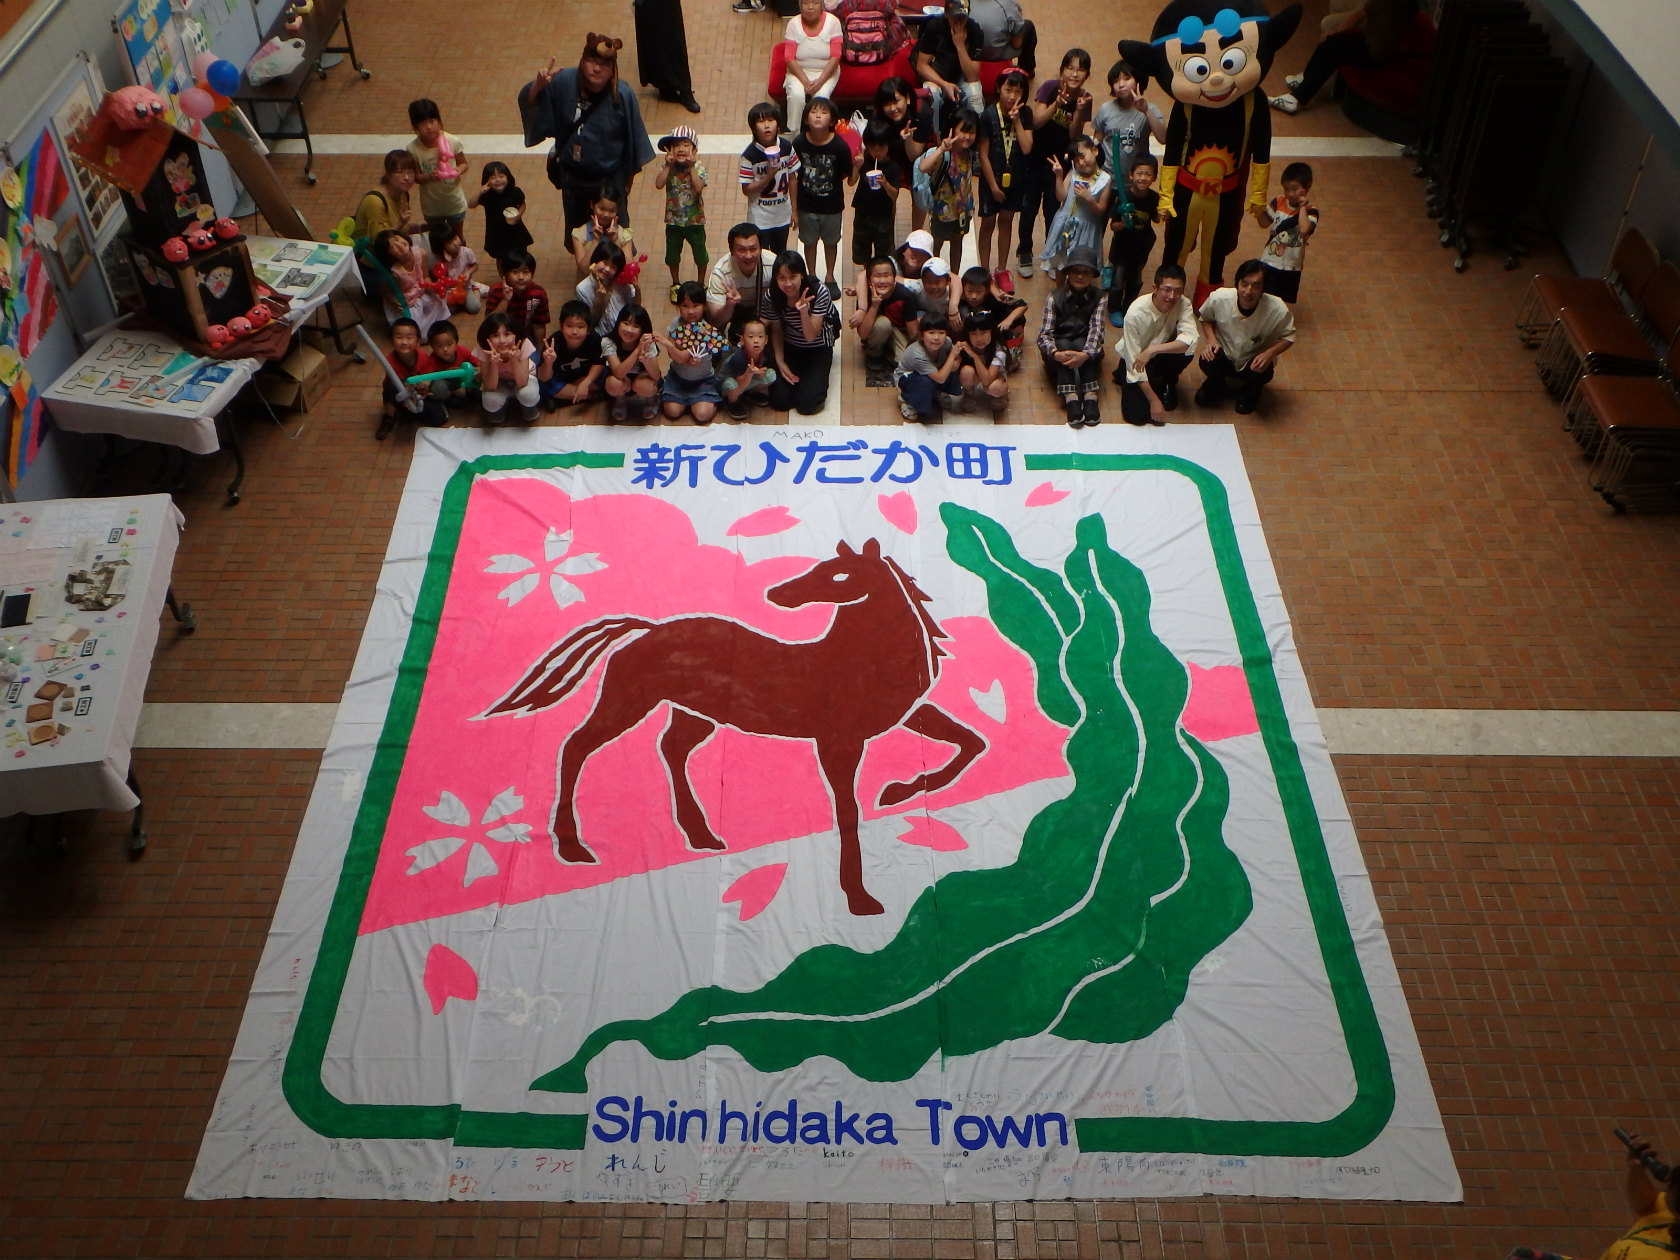 The Biggest Painting in the World 2020 Shinhidaka-cho was completed